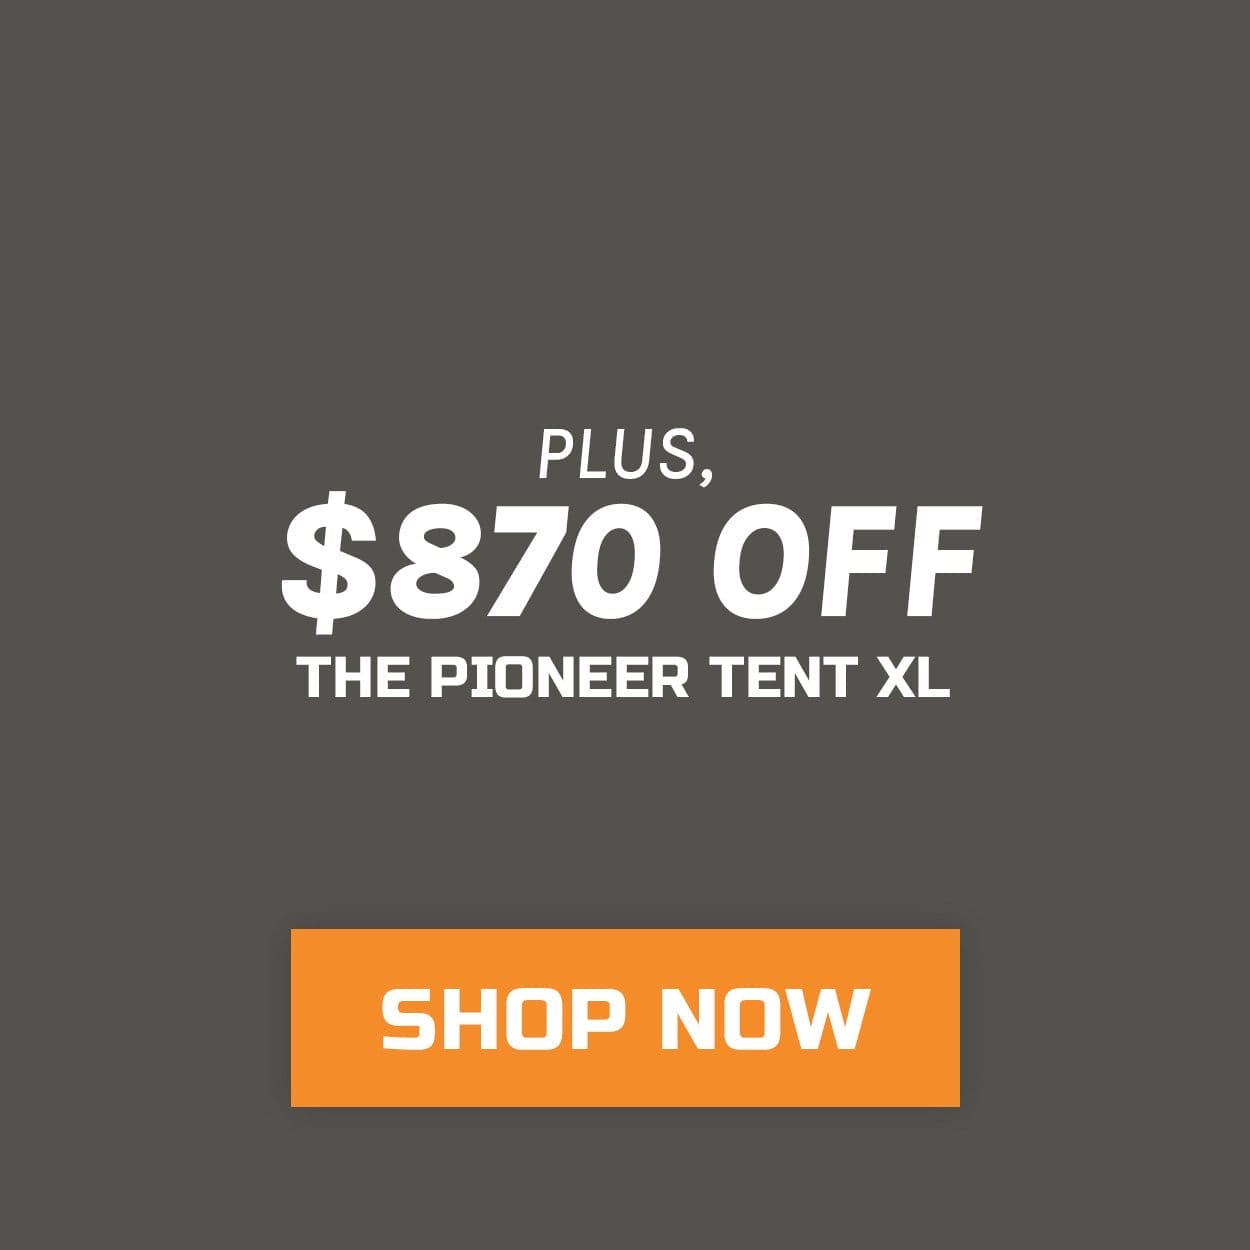 Plus, \\$870 off the Pioneer Tent XL